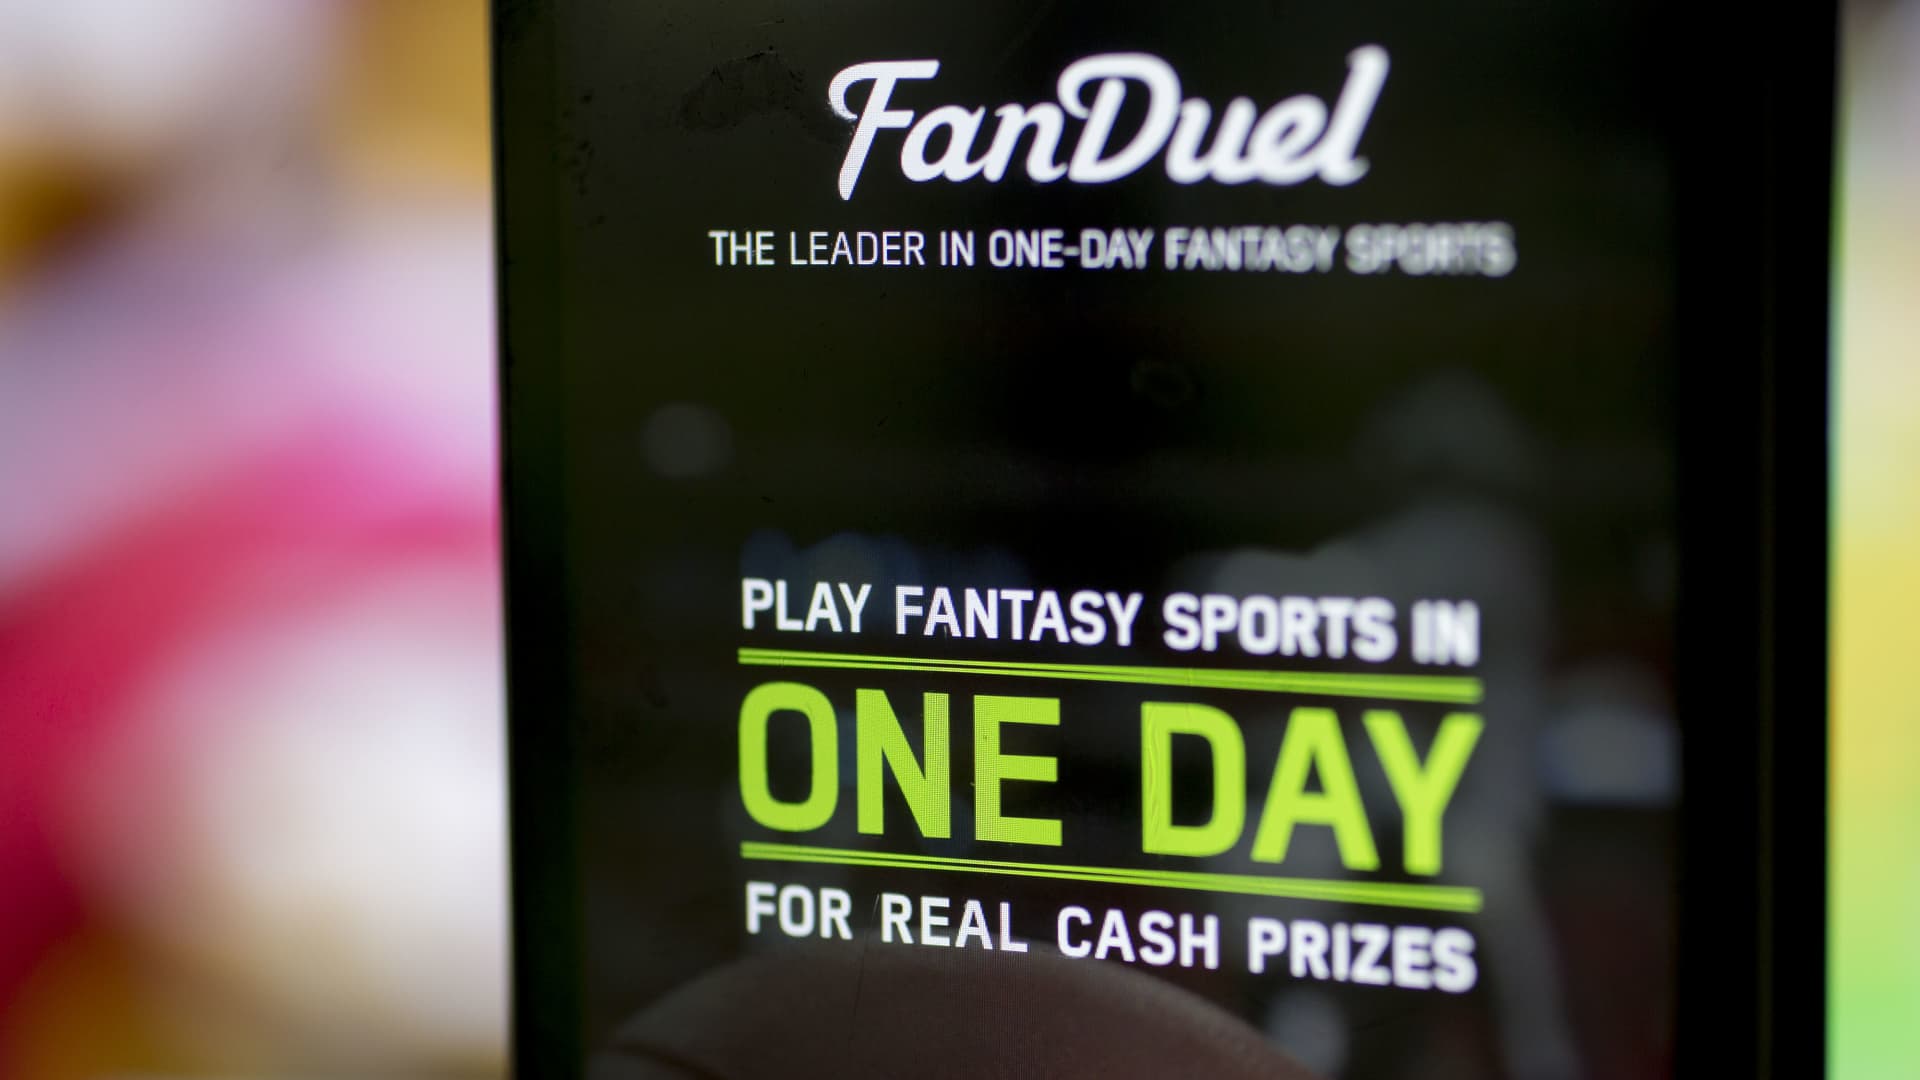 Fox wins merely to clutch a stake in FanDuel, but now not at the price it wished